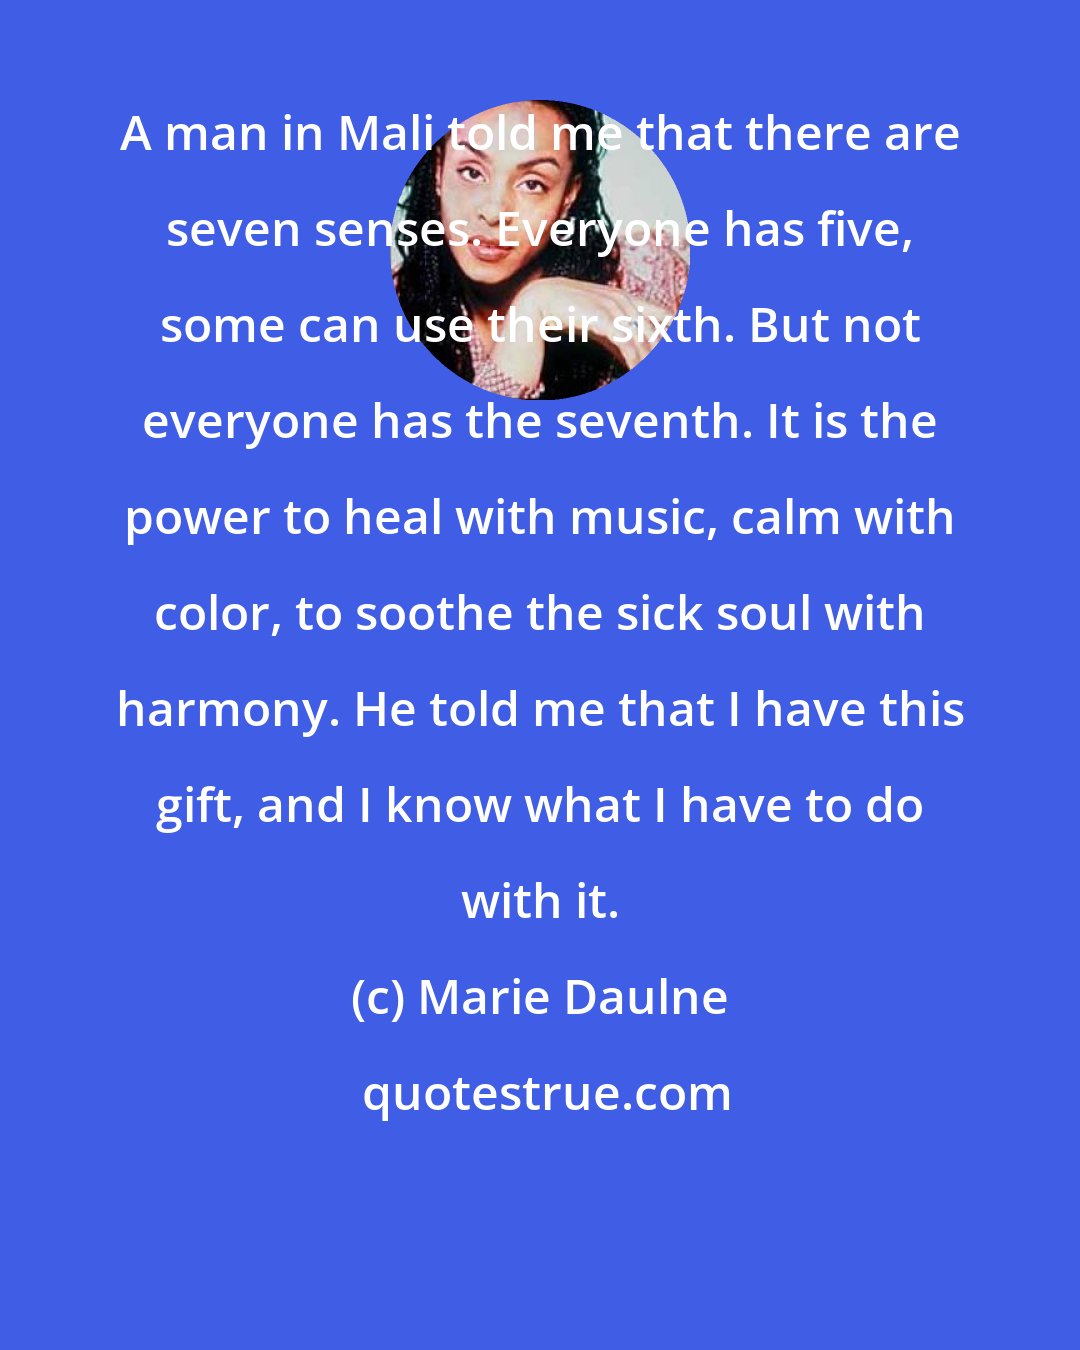 Marie Daulne: A man in Mali told me that there are seven senses. Everyone has five, some can use their sixth. But not everyone has the seventh. It is the power to heal with music, calm with color, to soothe the sick soul with harmony. He told me that I have this gift, and I know what I have to do with it.